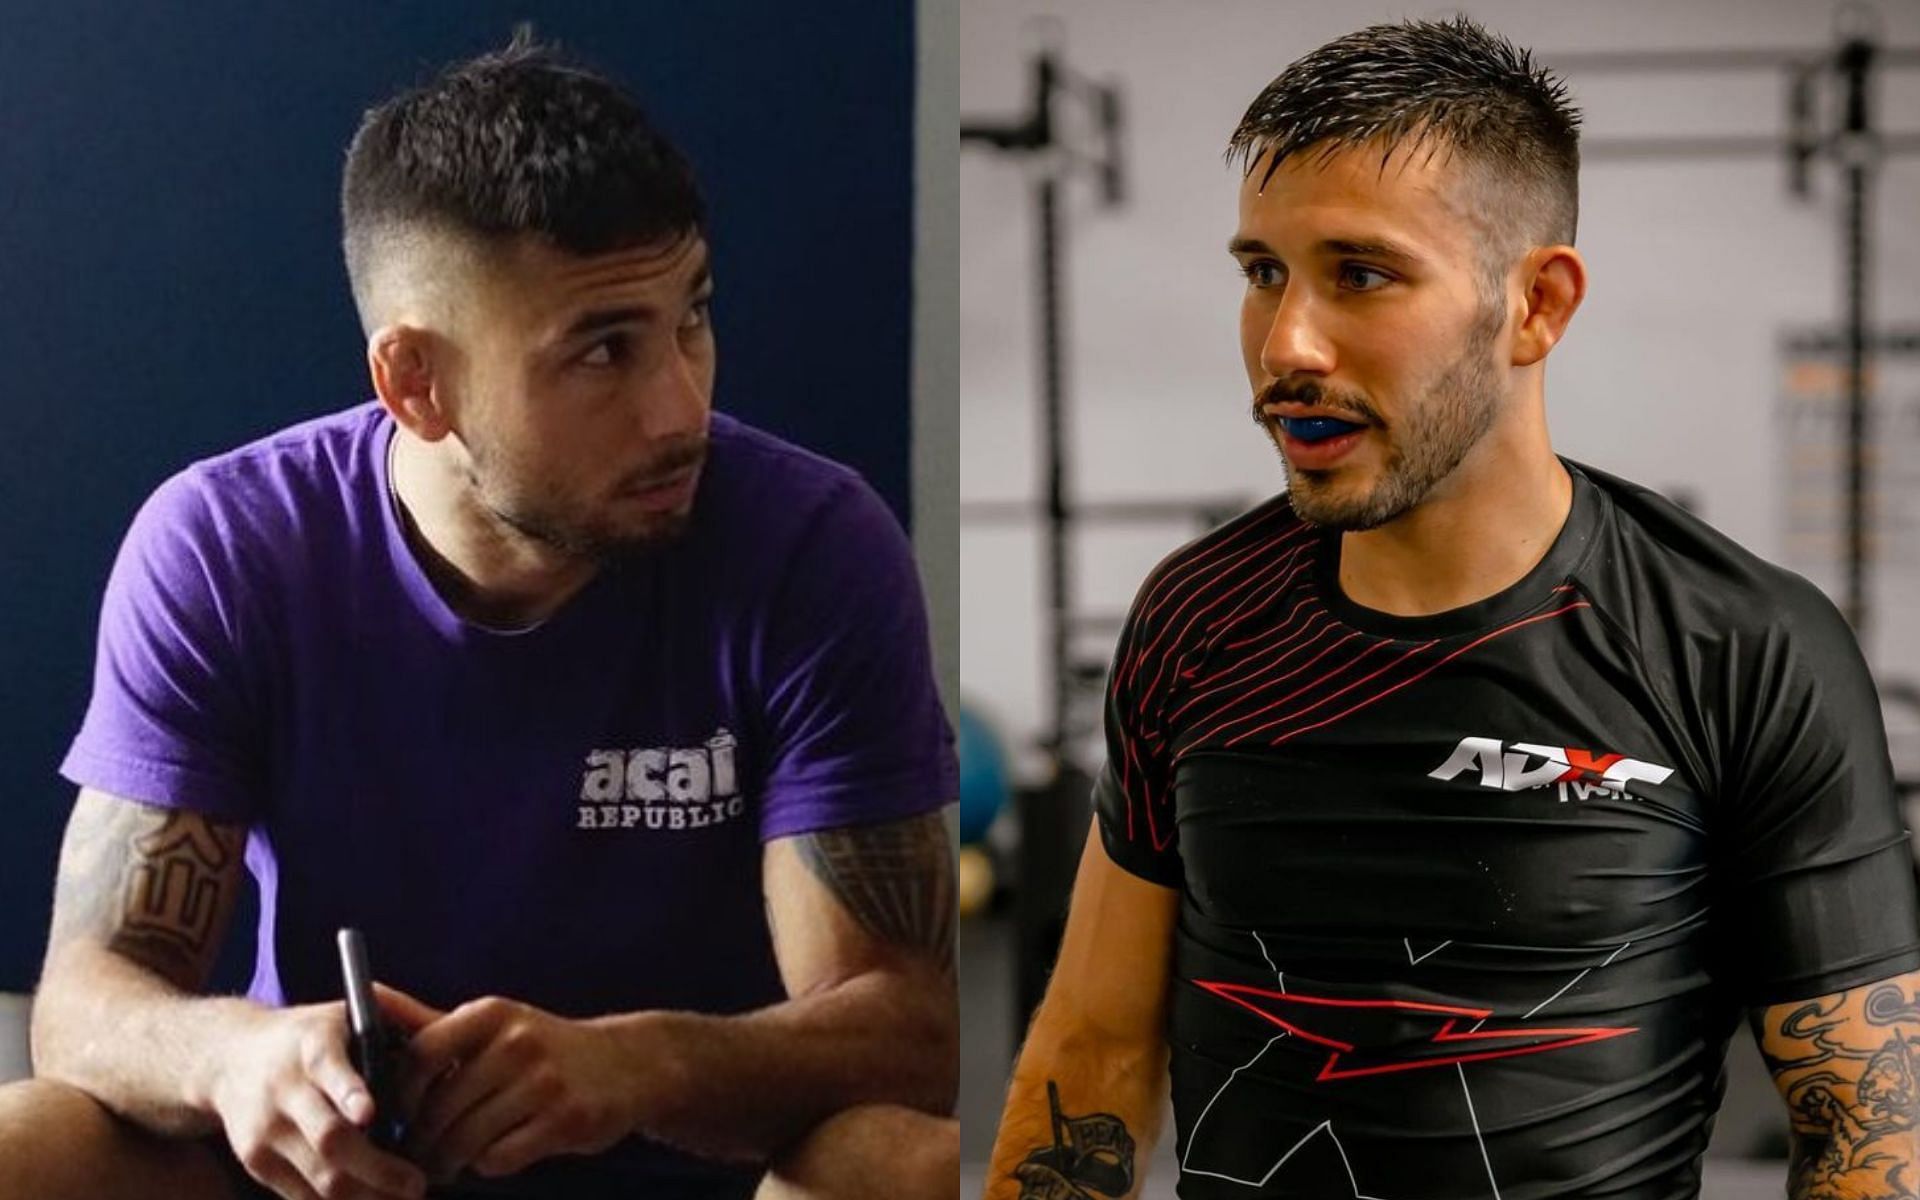 Alex Perez (left) will face Matheus Nicolau (right) in a flyweight showdown next [Images courtesy: @alexperezmma and @matheusnicolaumma on Instagram]